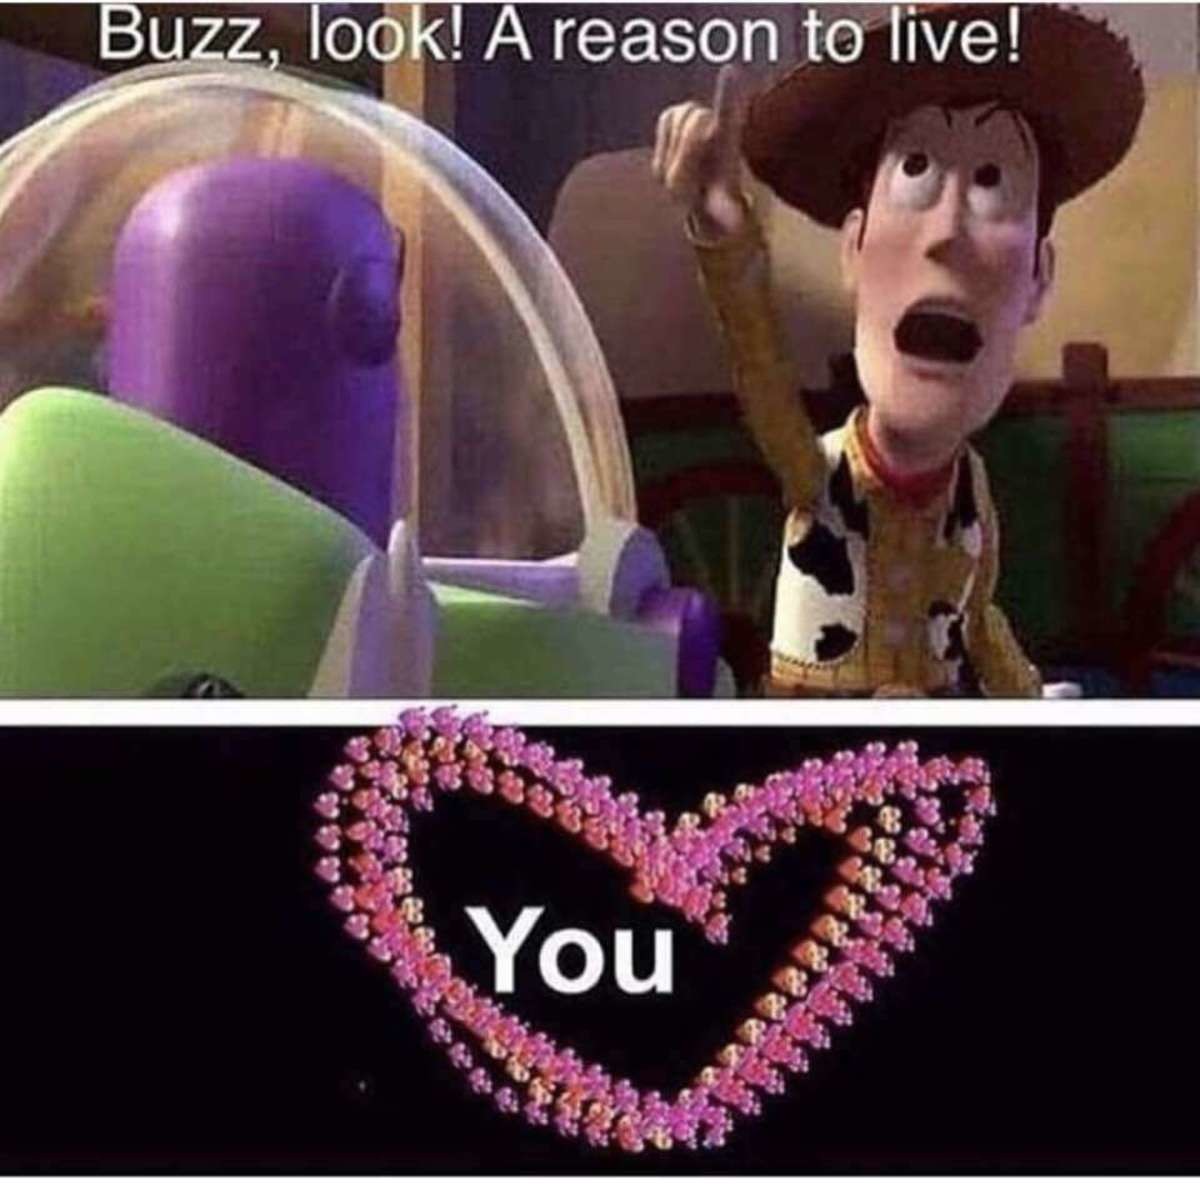 Buzz, look! A reason to live! Wholesome Meme